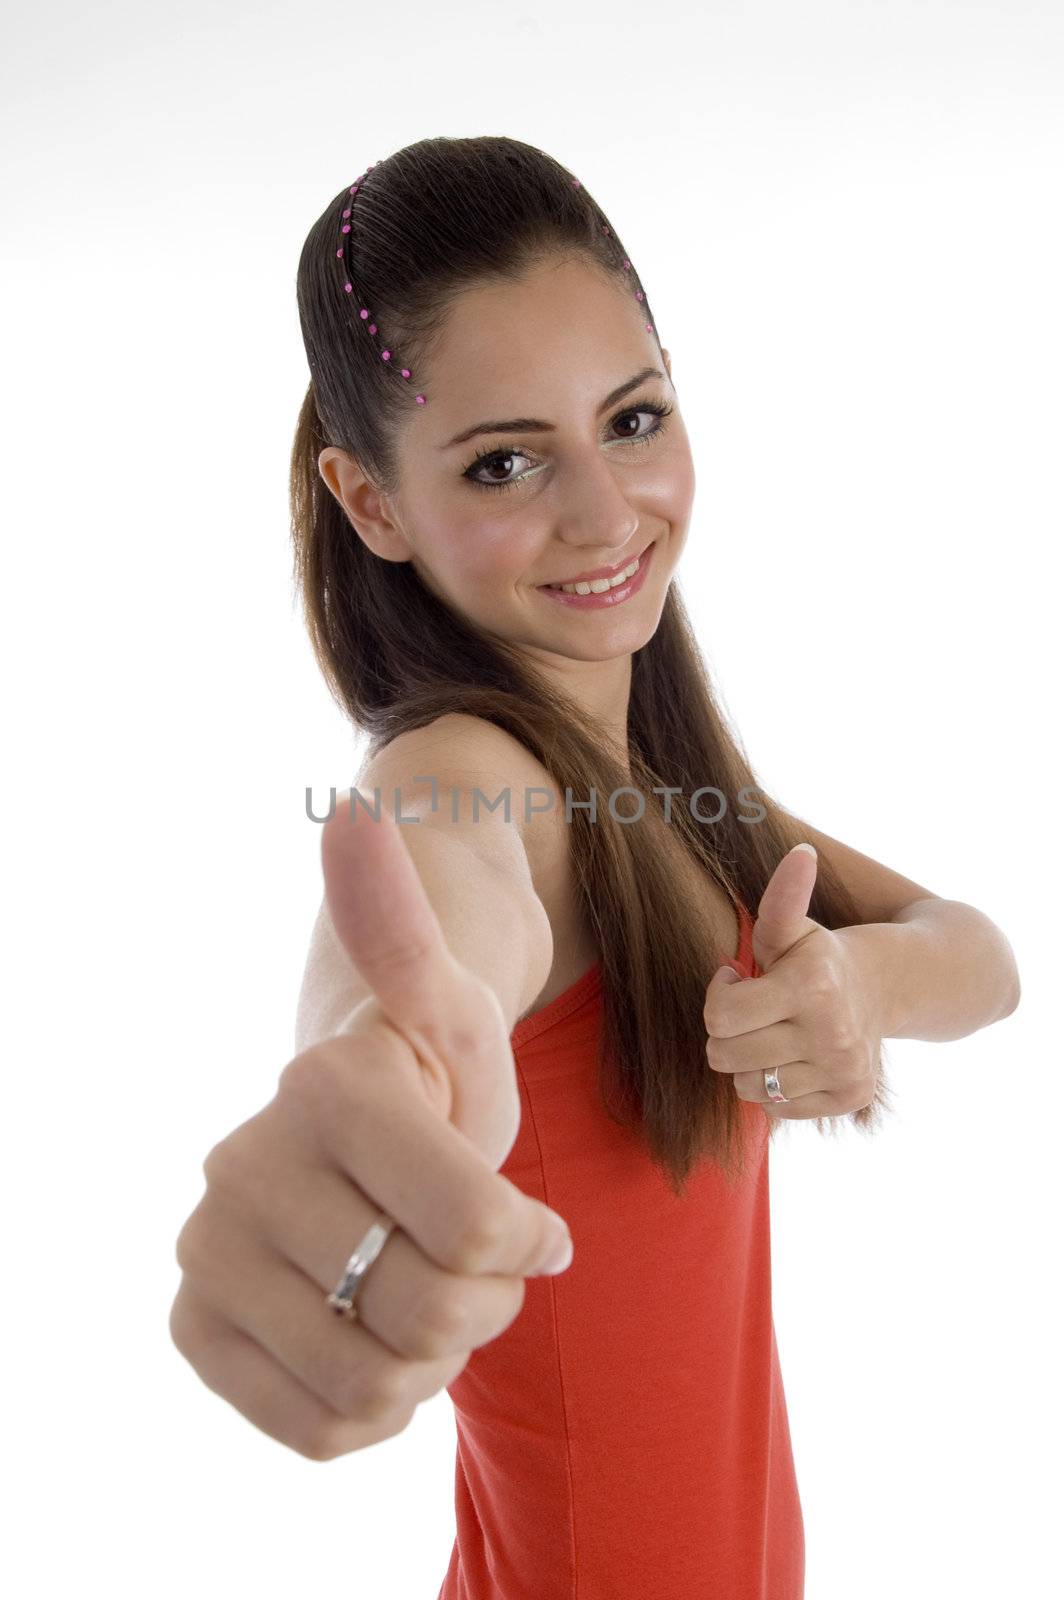 smiling girl with beautiful hairstyle showing thumb gesture by imagerymajestic